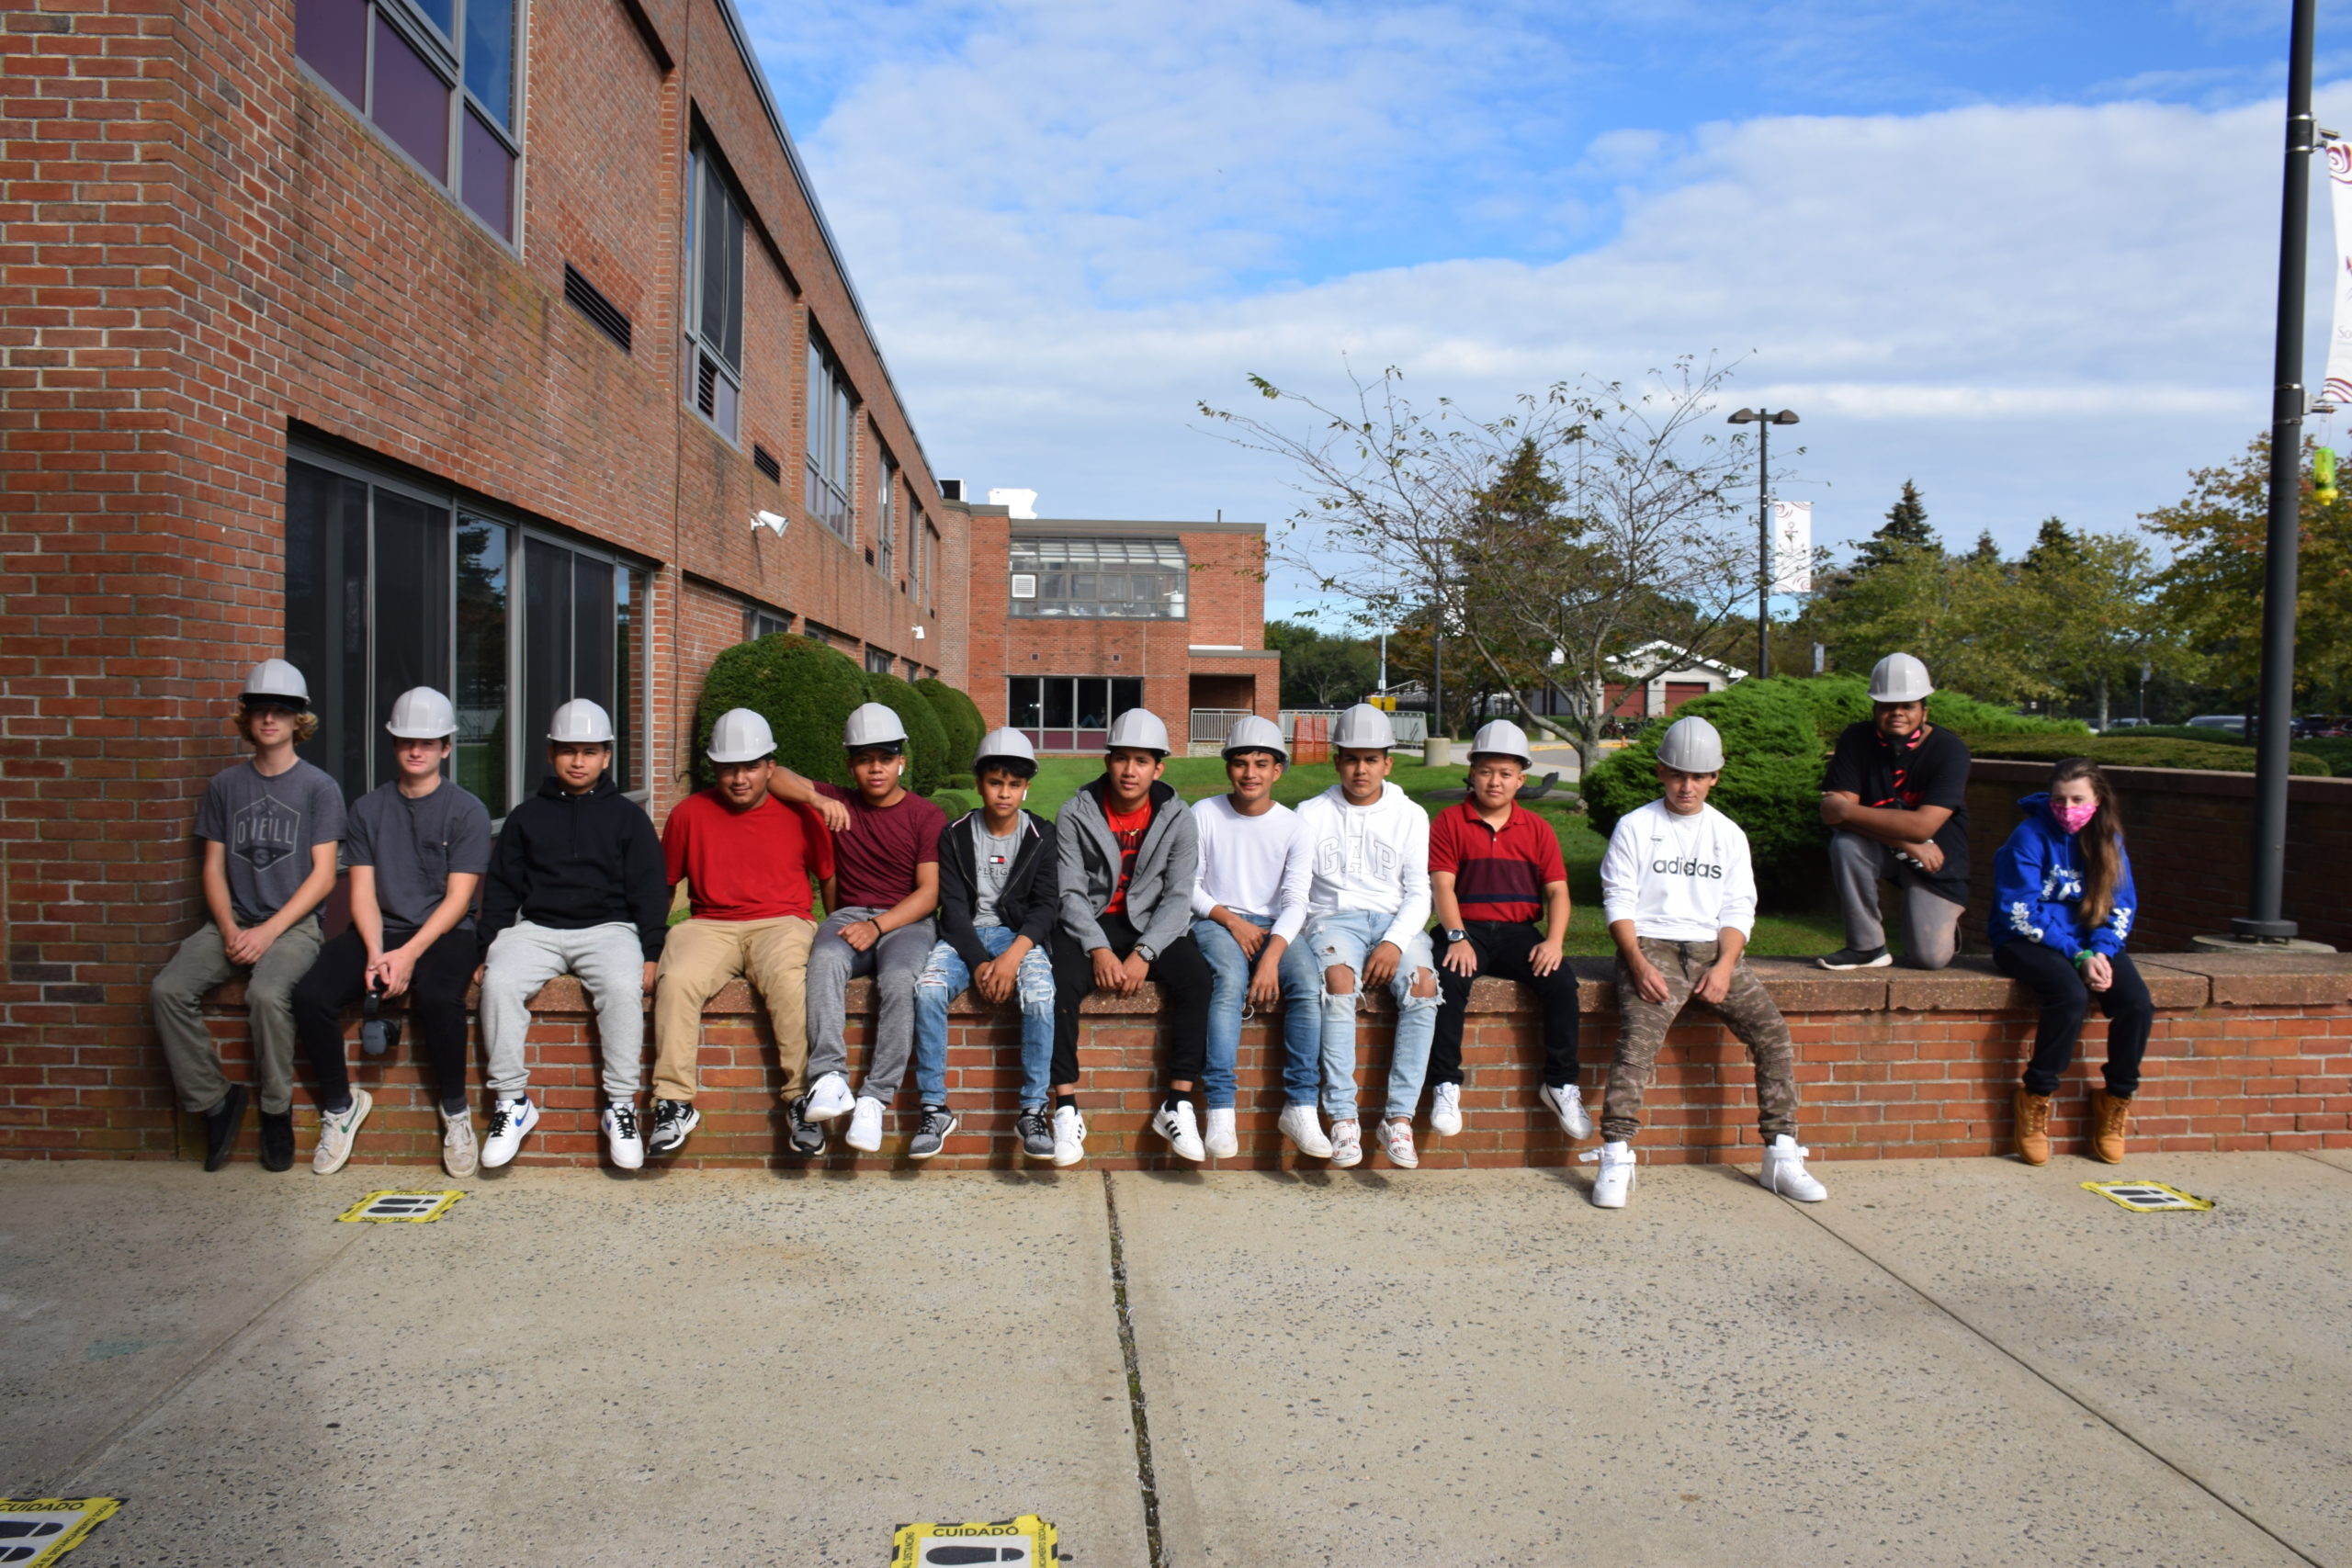 Thirteen Southampton High School students enrolled in Eastern Suffolk BOCES’ carpentry program earned scholarship funds from the Southampton Business Alliance.